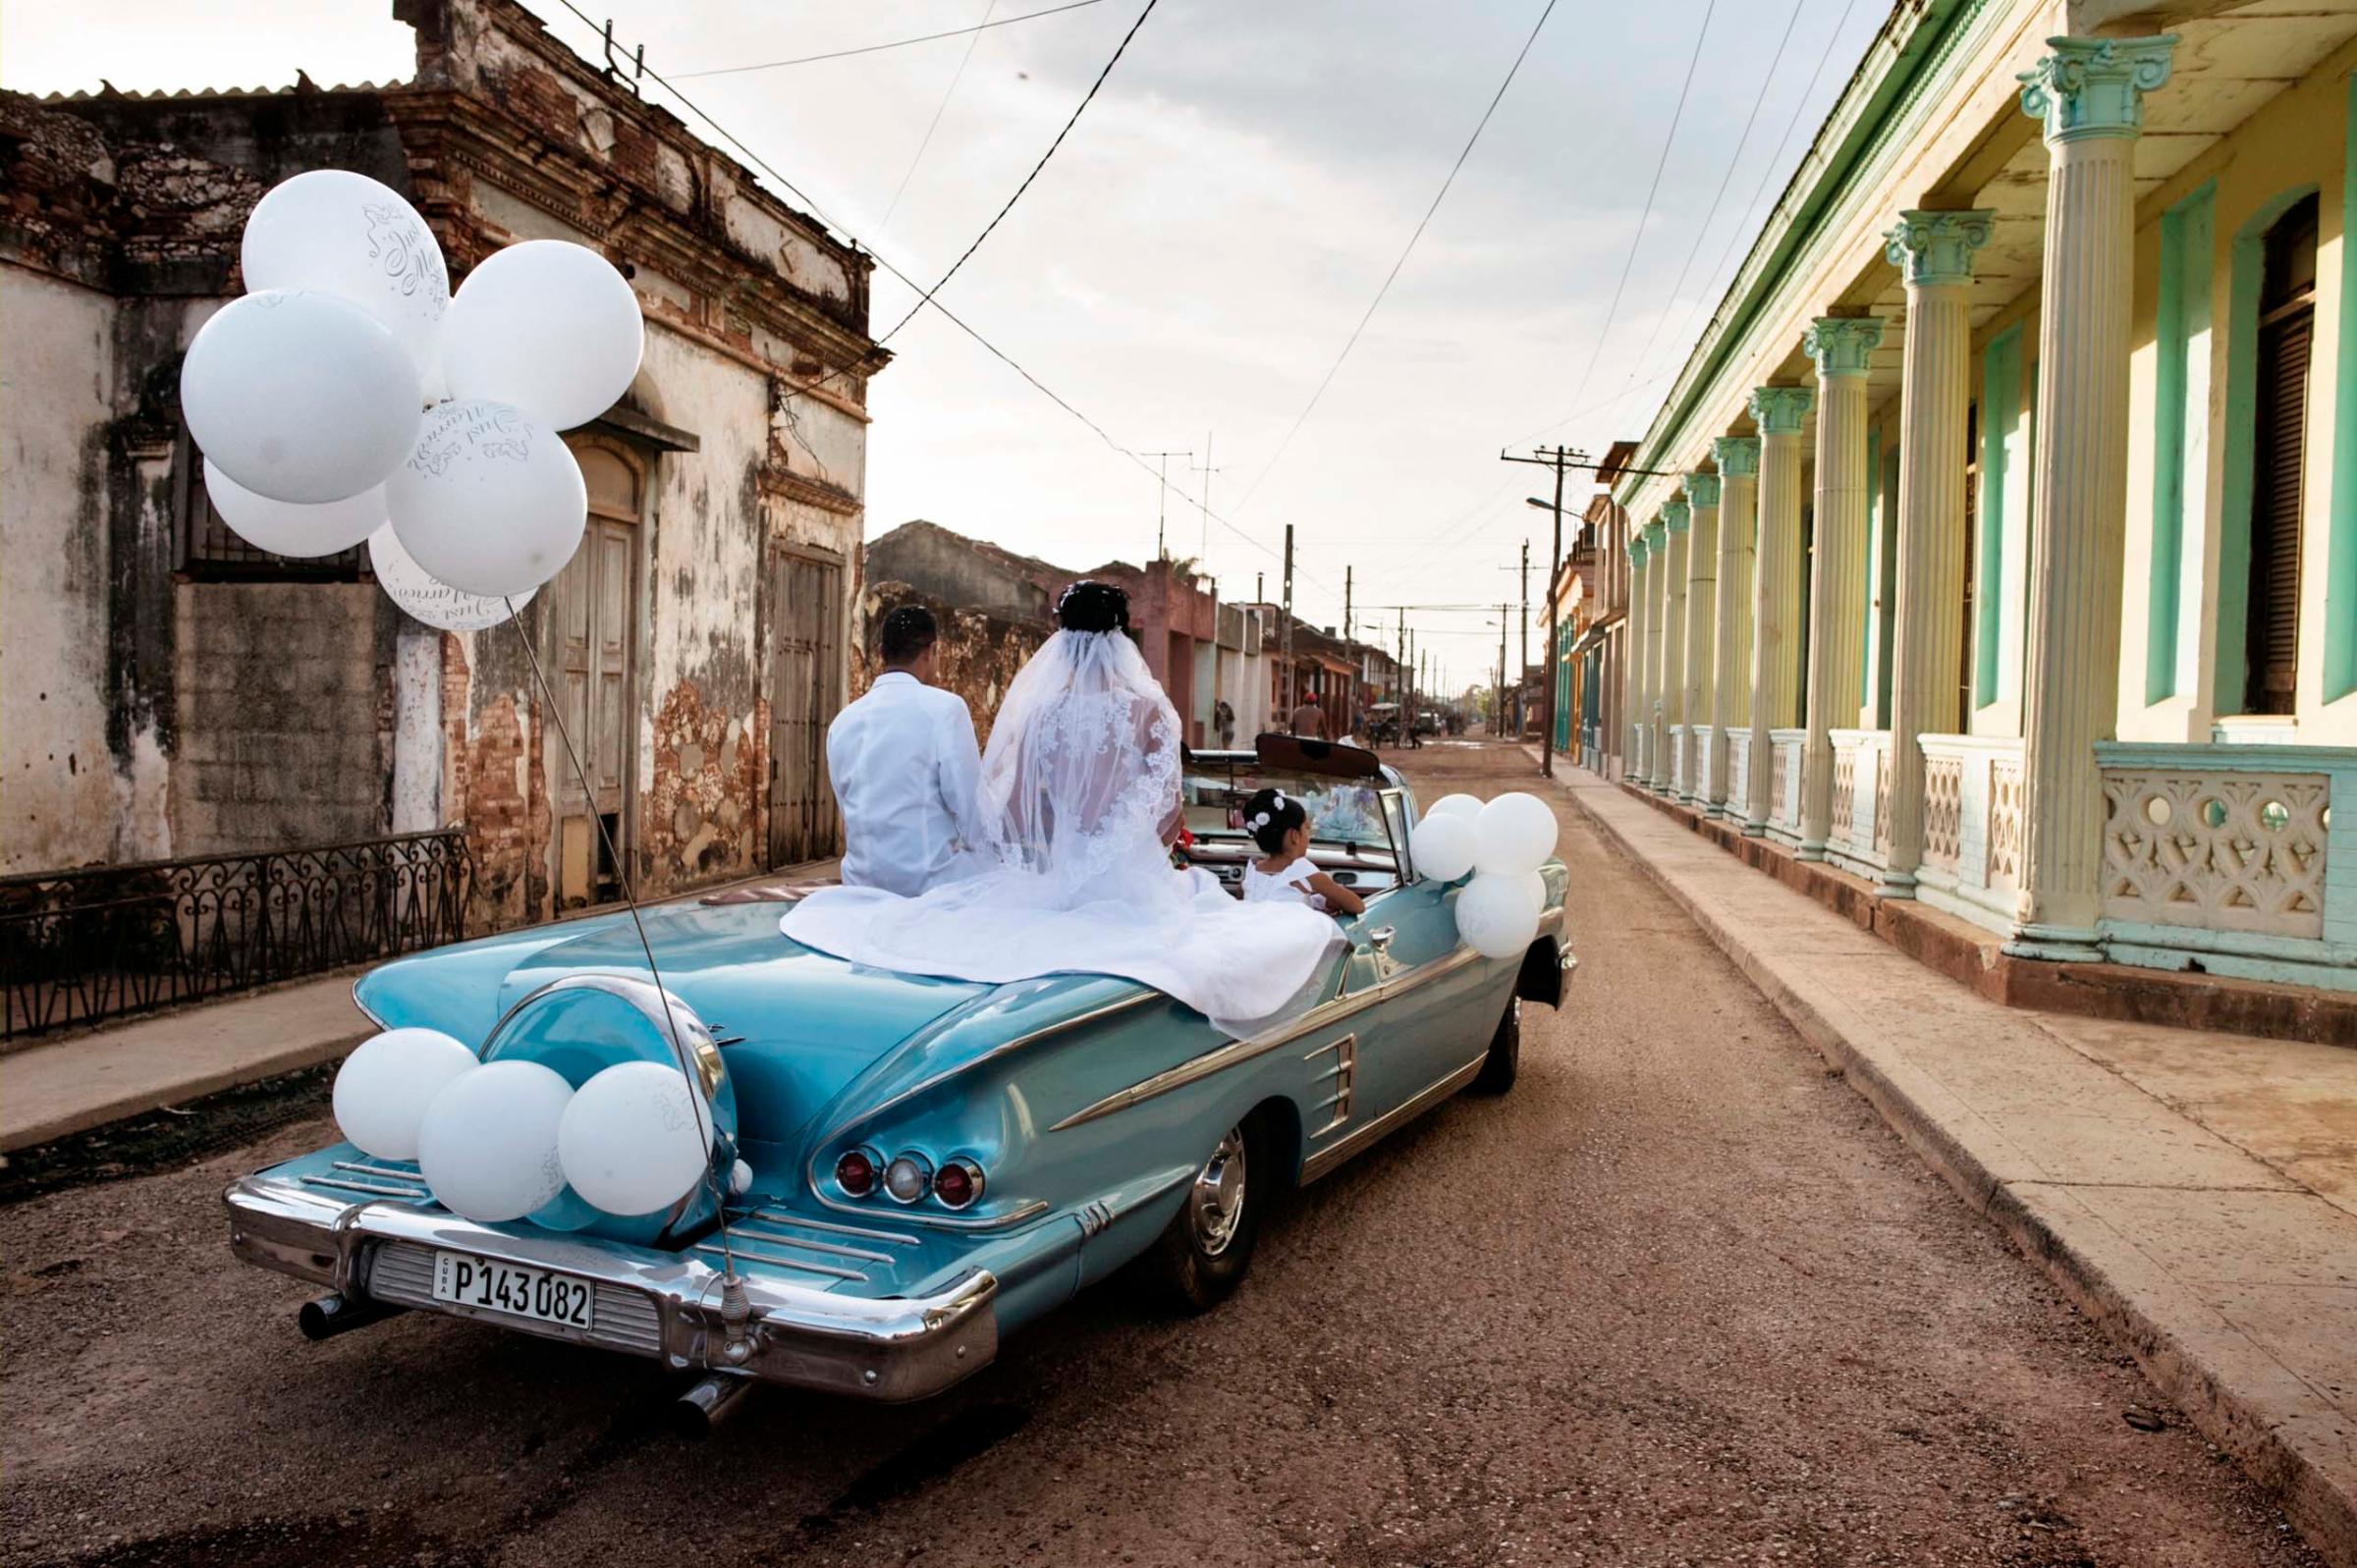 Jan. 2015. Newlyweds ride in a vintage American car through the streets of Guira de Melena. In this prosperous area outside Havana, weddings can cost as much as $20,000 dollars.